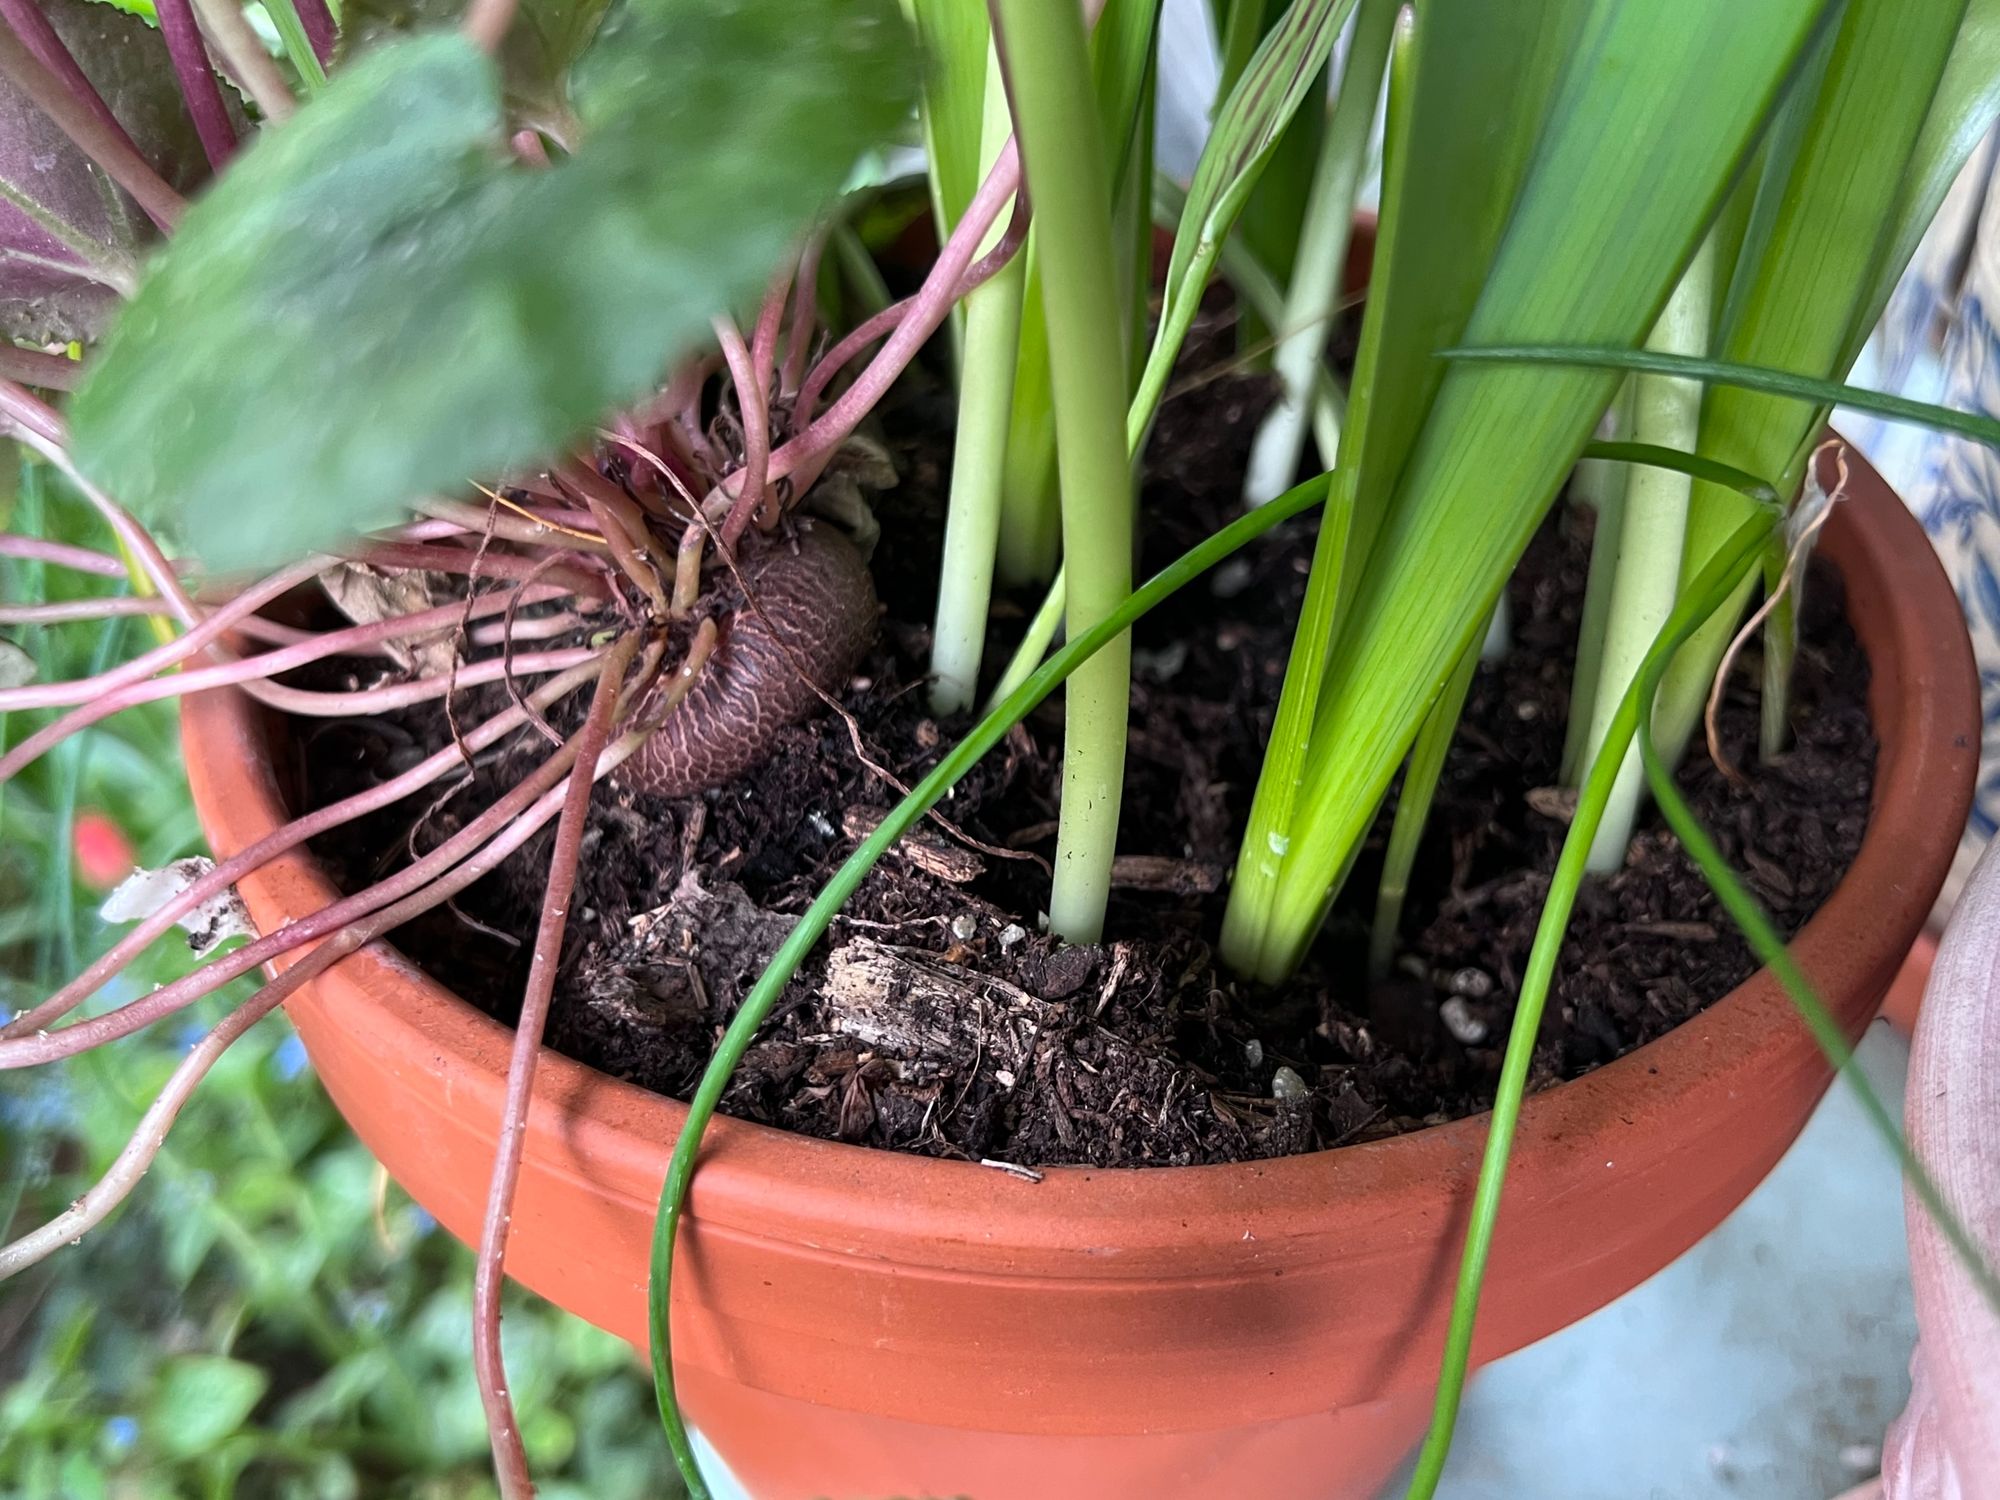 A pot with an active cyclamen tuber resting on the top of the soil, with other stalks from bulbs emerging next to it.